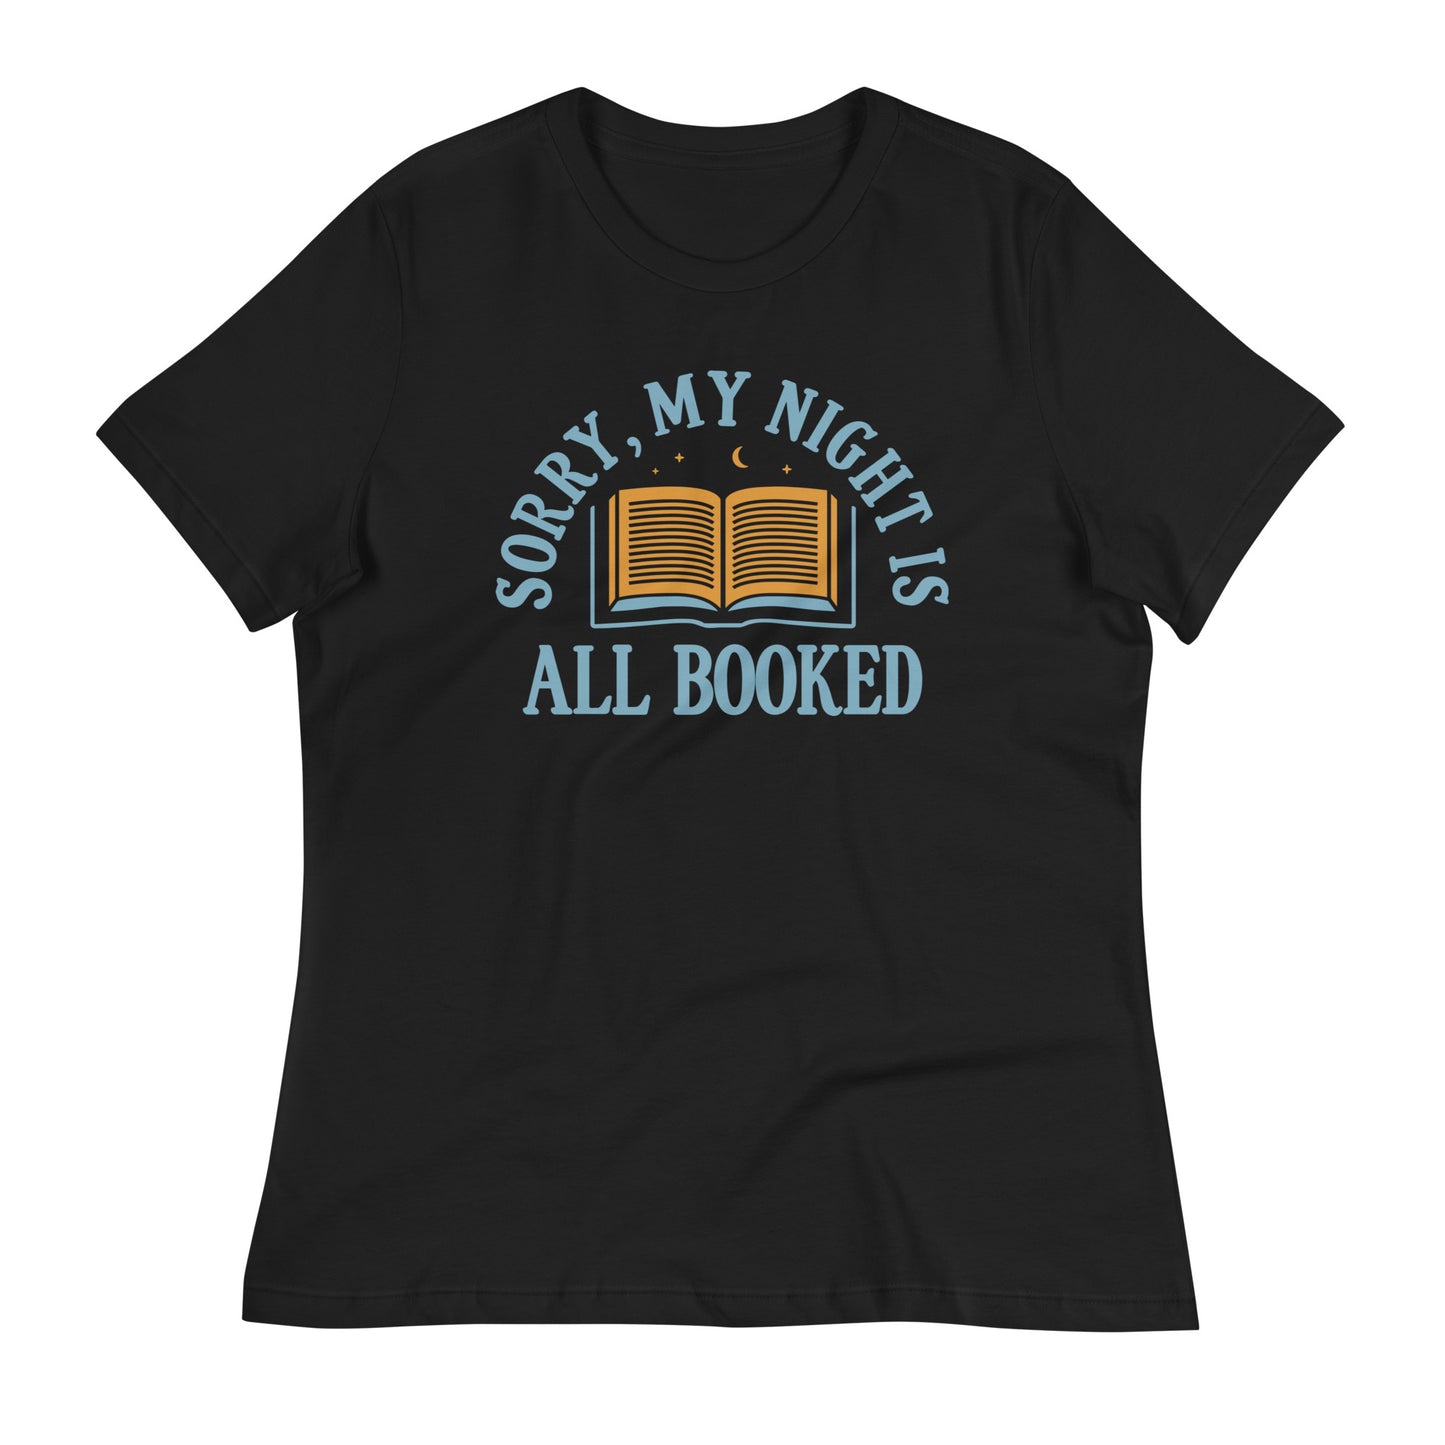 Sorry, My Night Is All Booked Women's Signature Tee